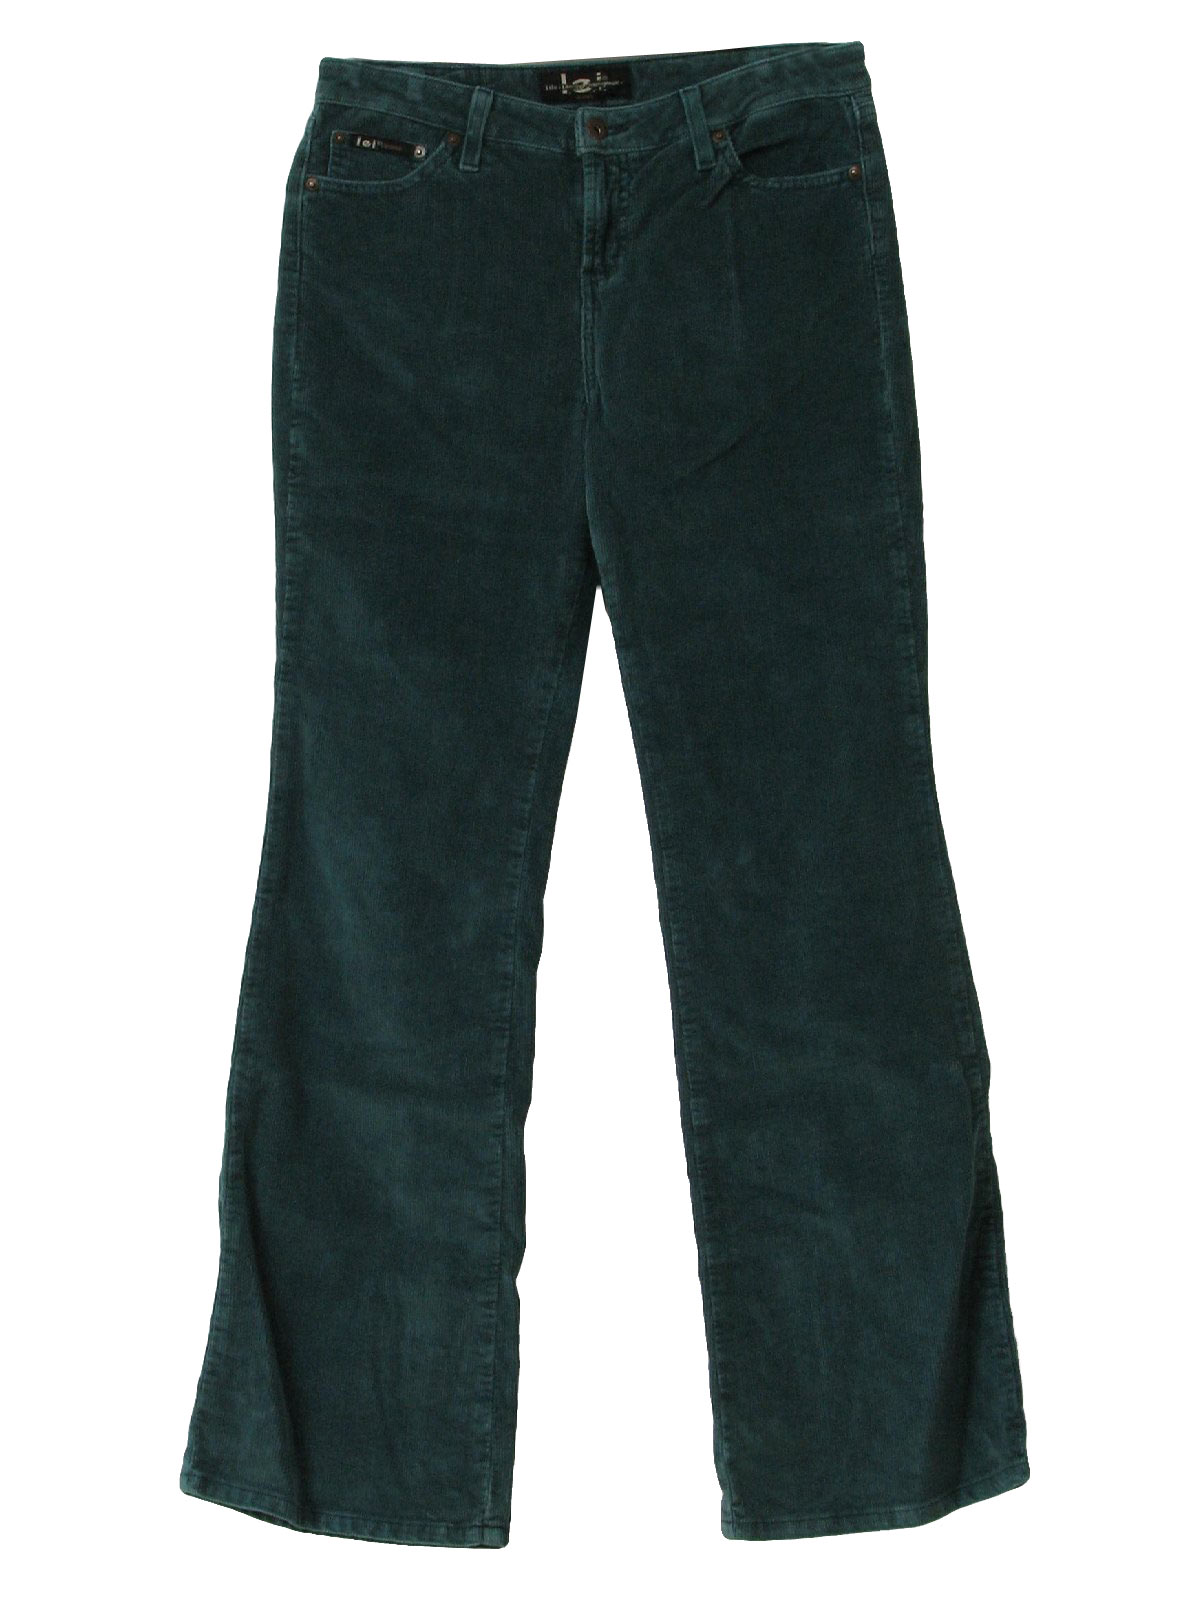 1970's Vintage L.E.I. Jeans Bellbottom Pants: 70s style (made in 90s ...